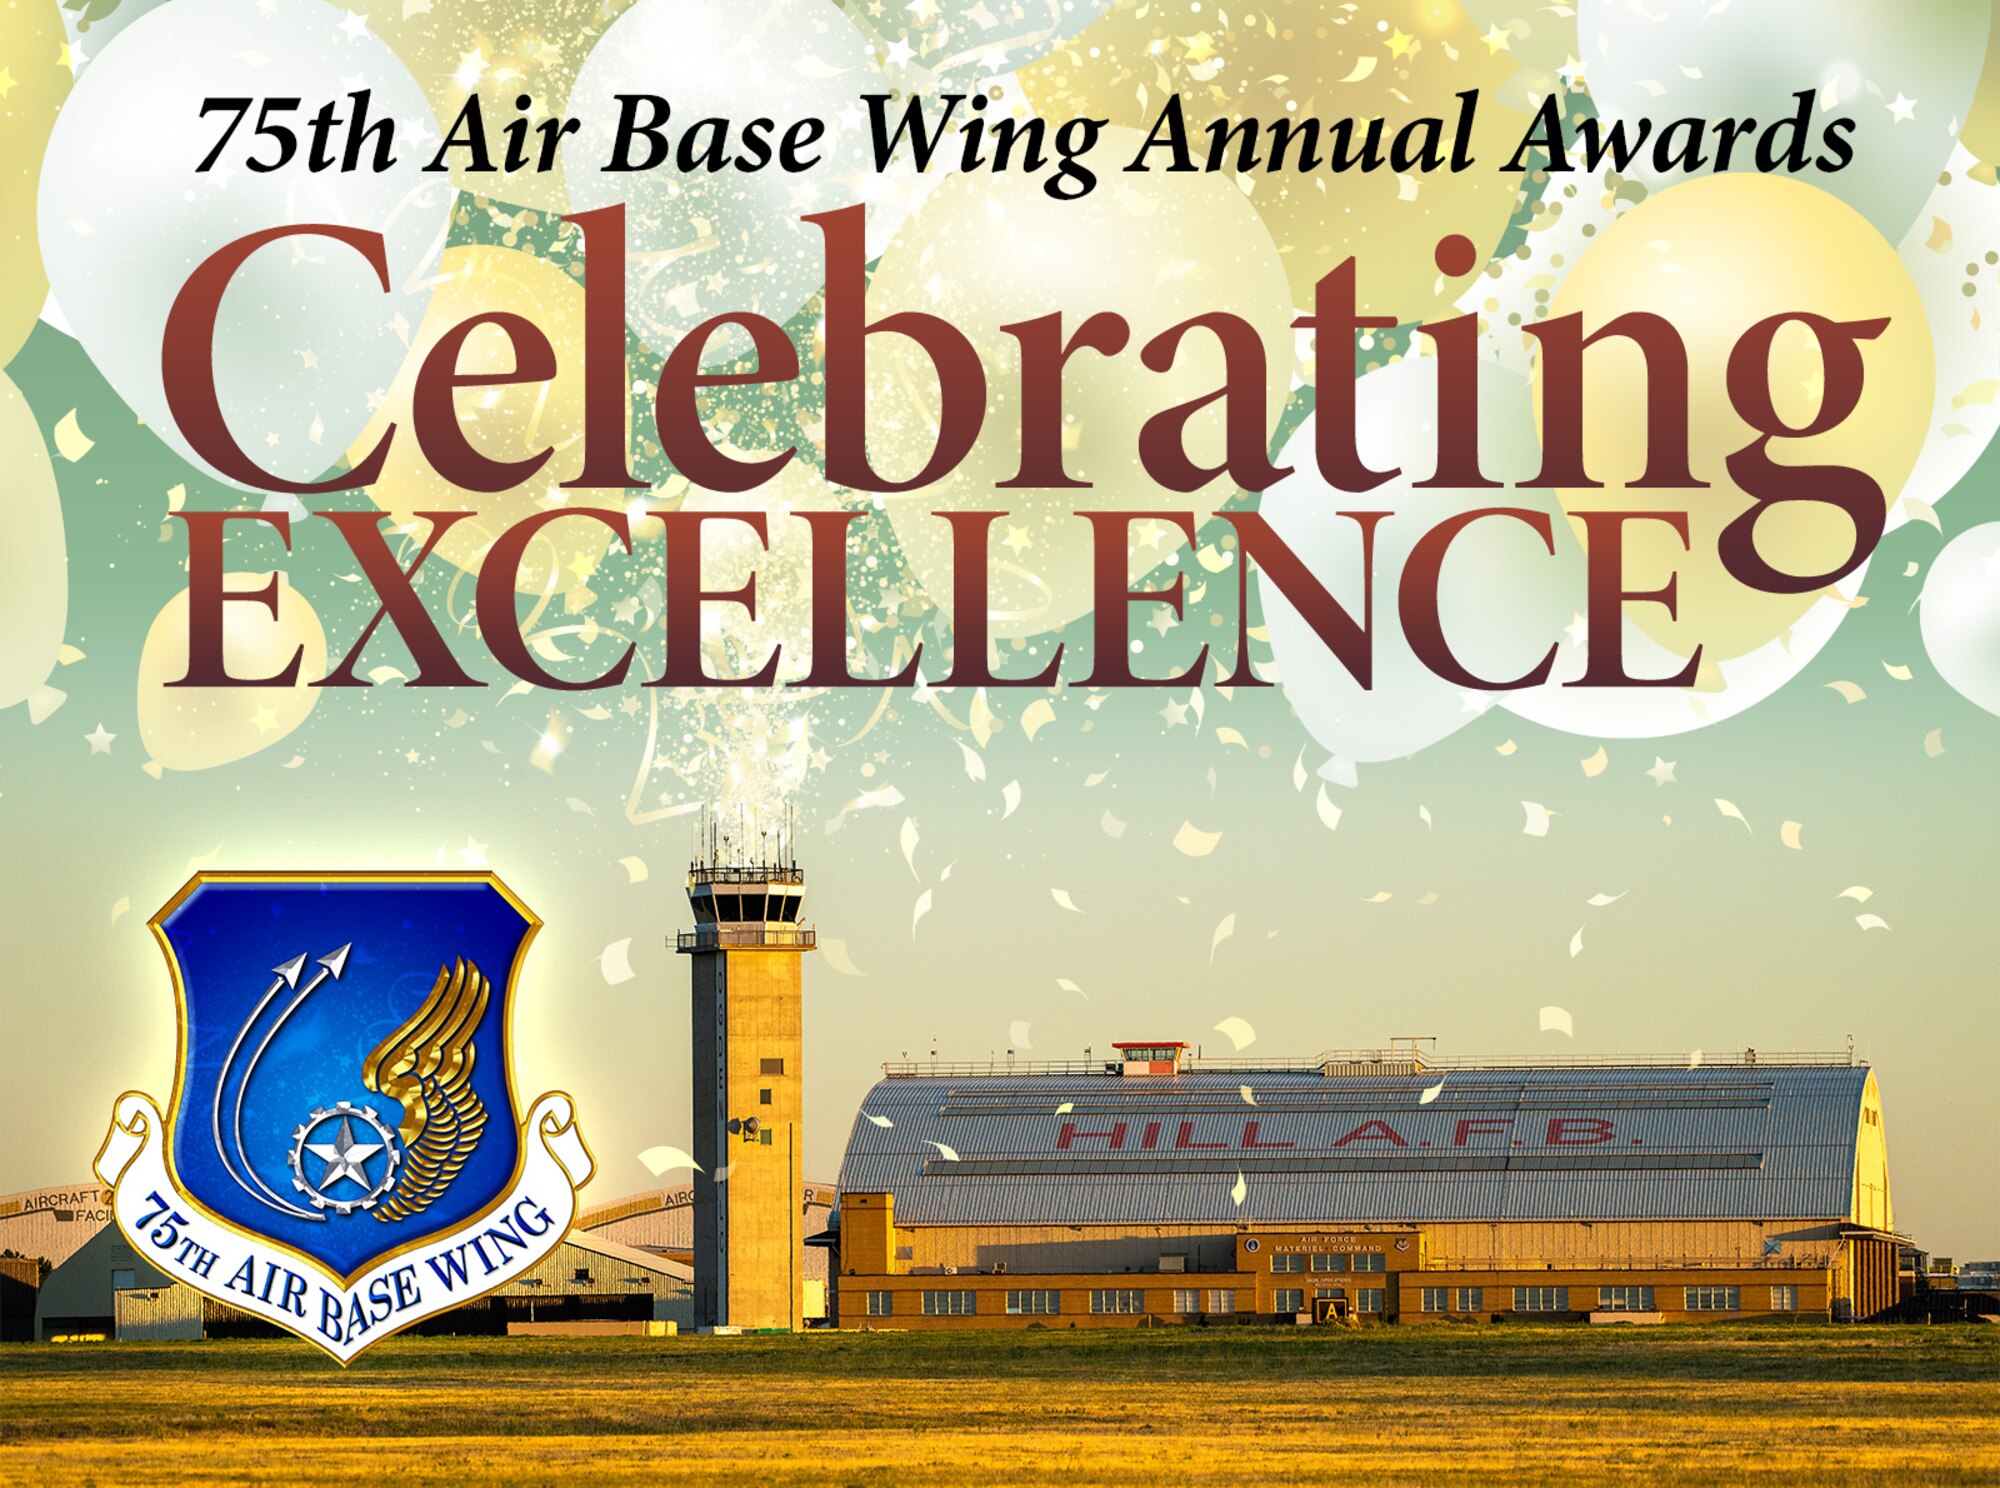 An image of the Hill AFB air traffic control tower adjacent to hangar 1. The words 75th Air Base Wing Annual Awards, Celebrating Excellence, is positioned at the top of the image. The 75th ABW shield/symbol is positioned at the bottom left hand corner of the image.